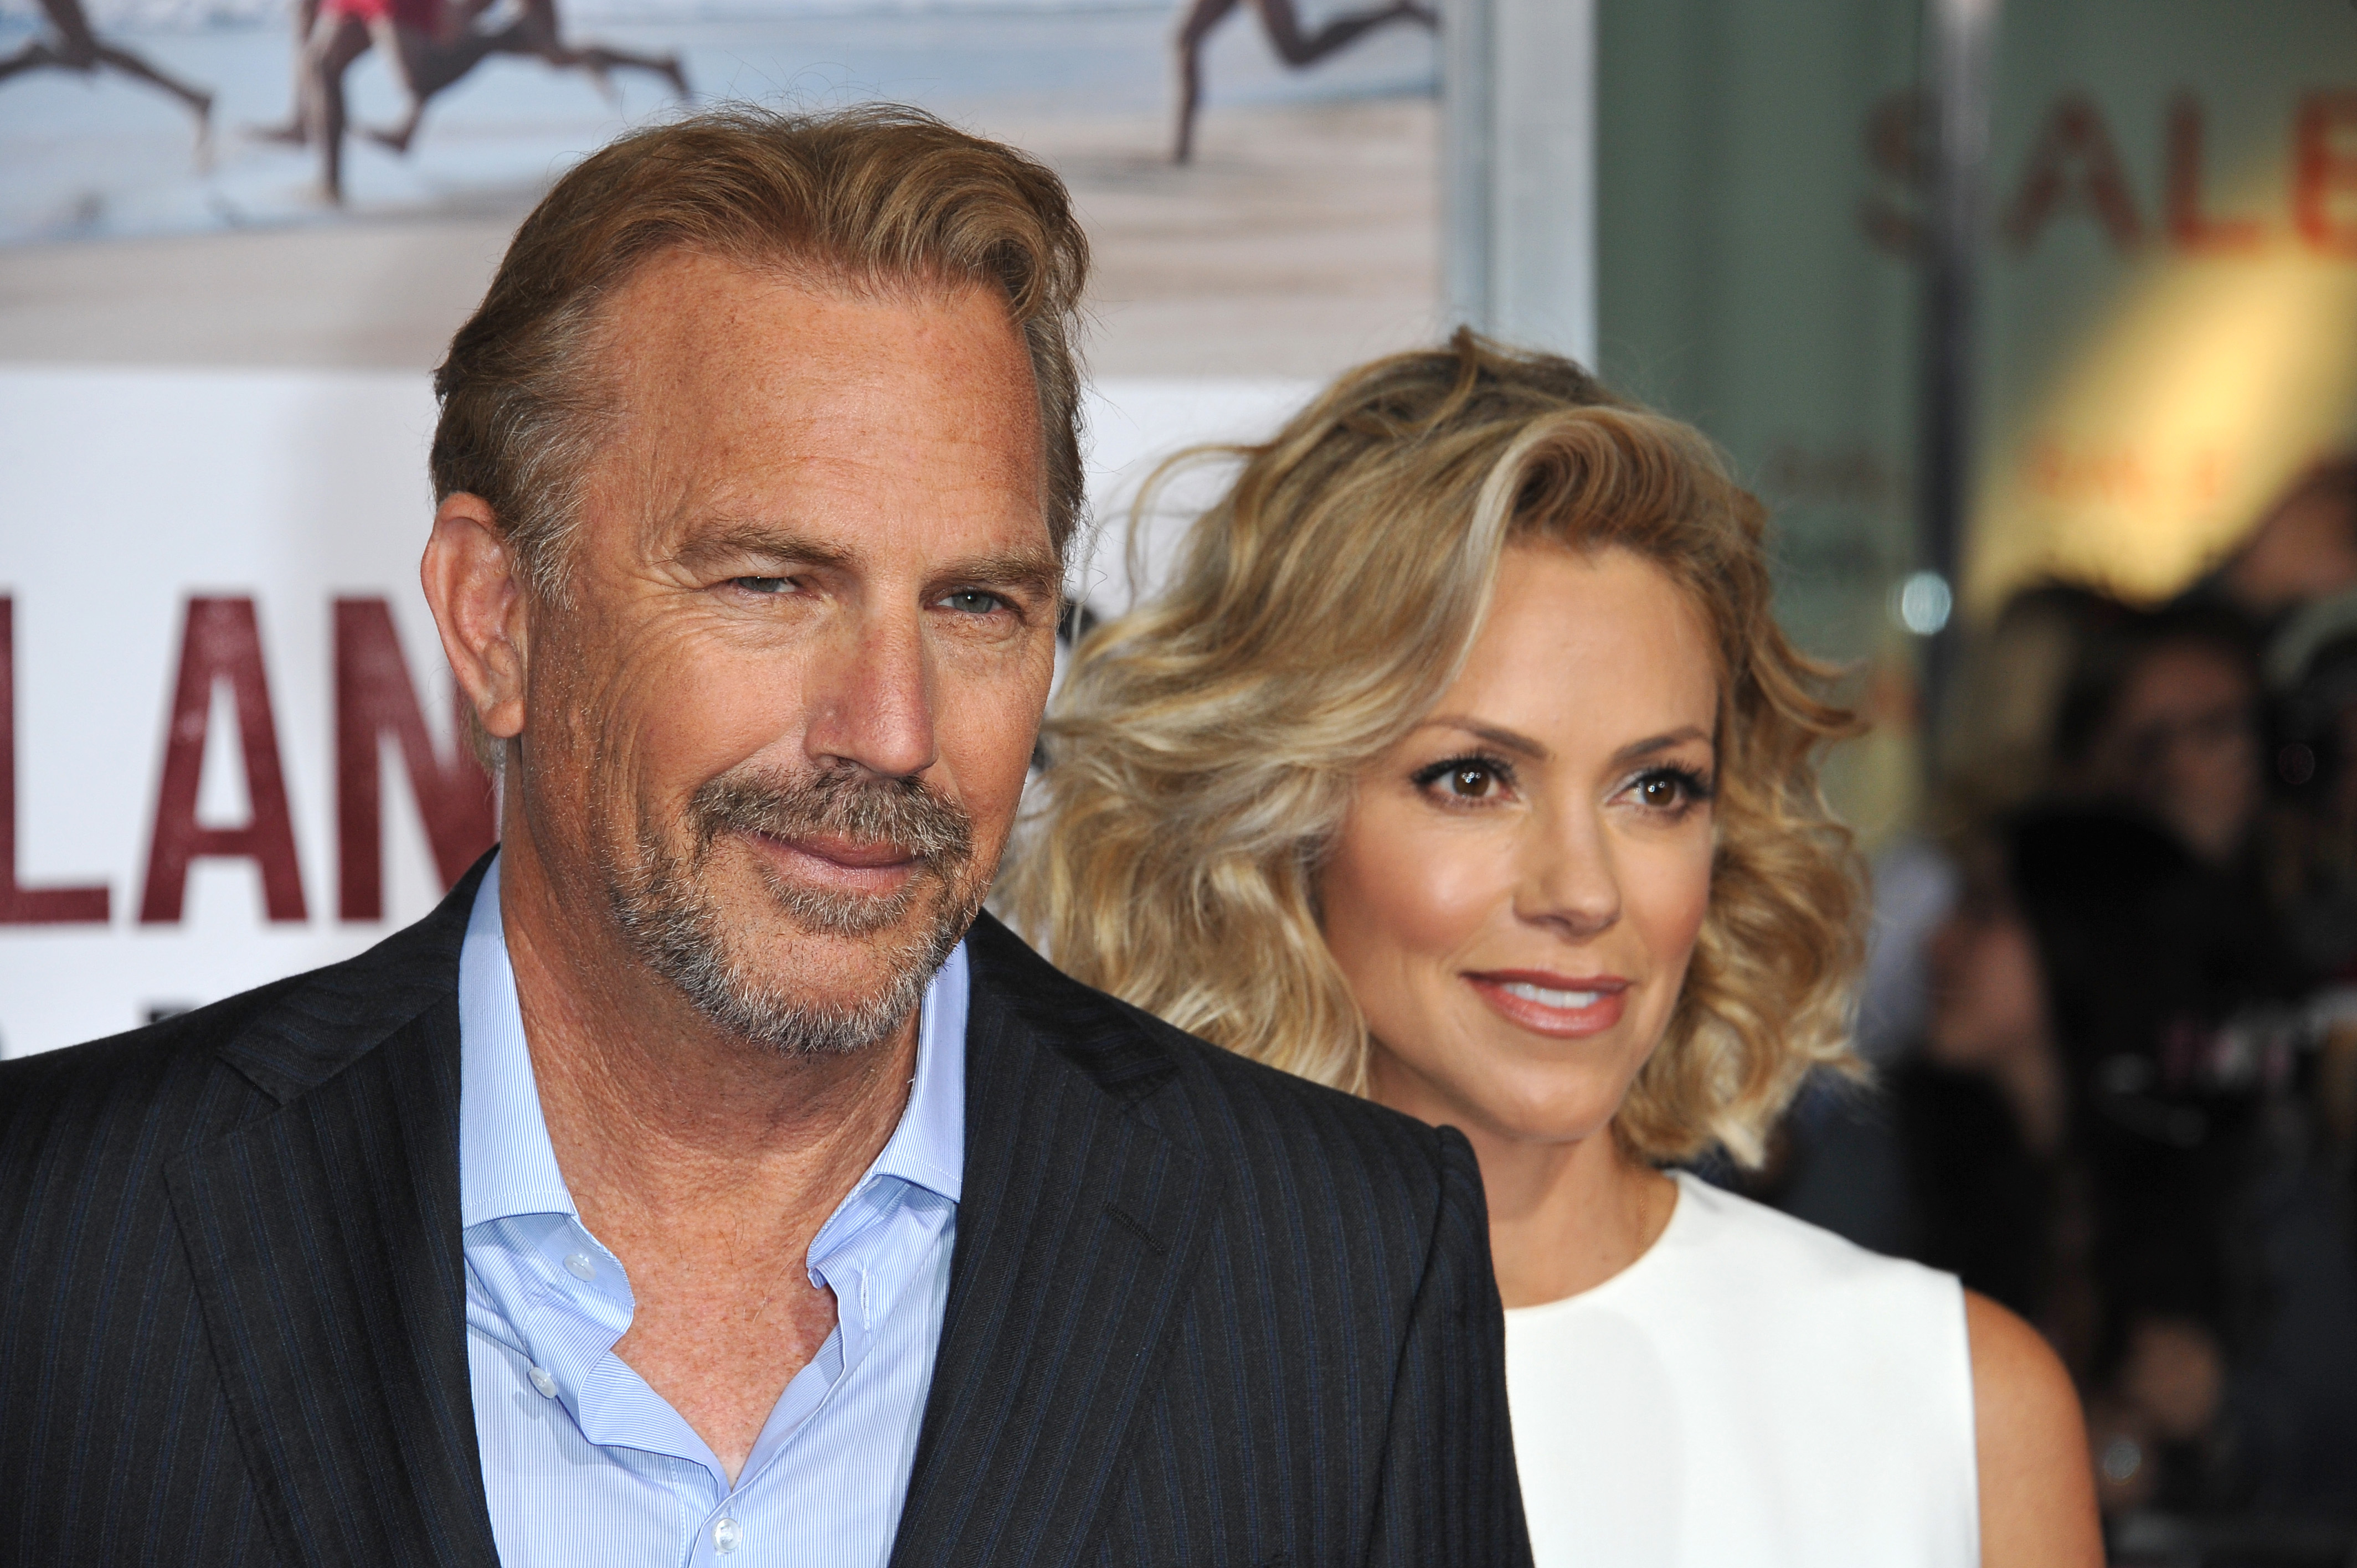 Does Kevin Costner’s estranged wife Christine want too much?